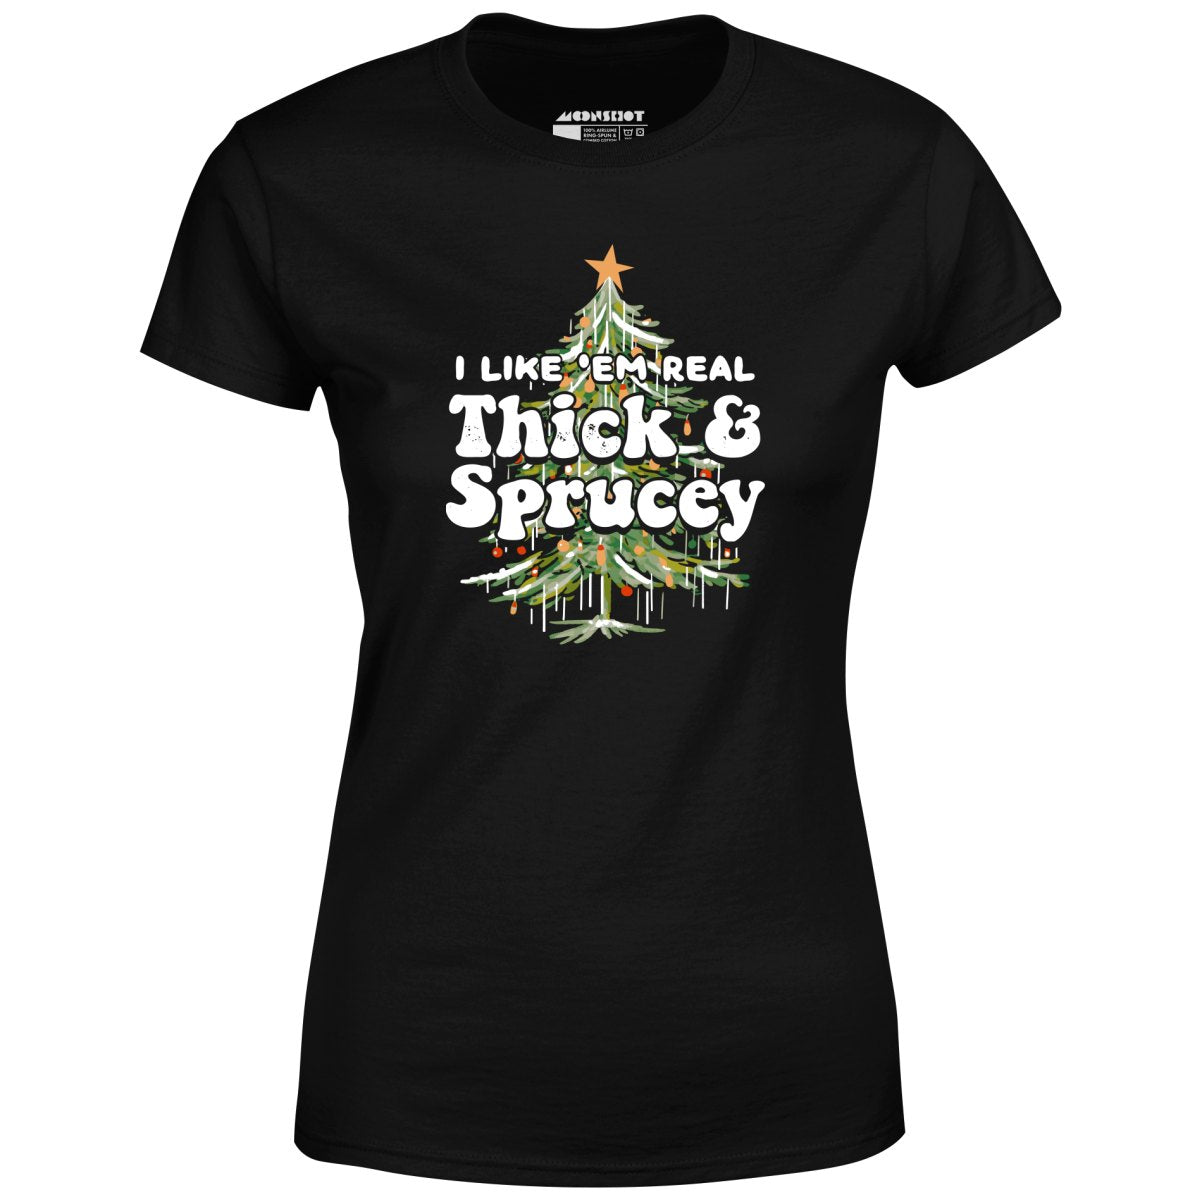 I Like em Real Thick and Sprucey - Women's T-Shirt